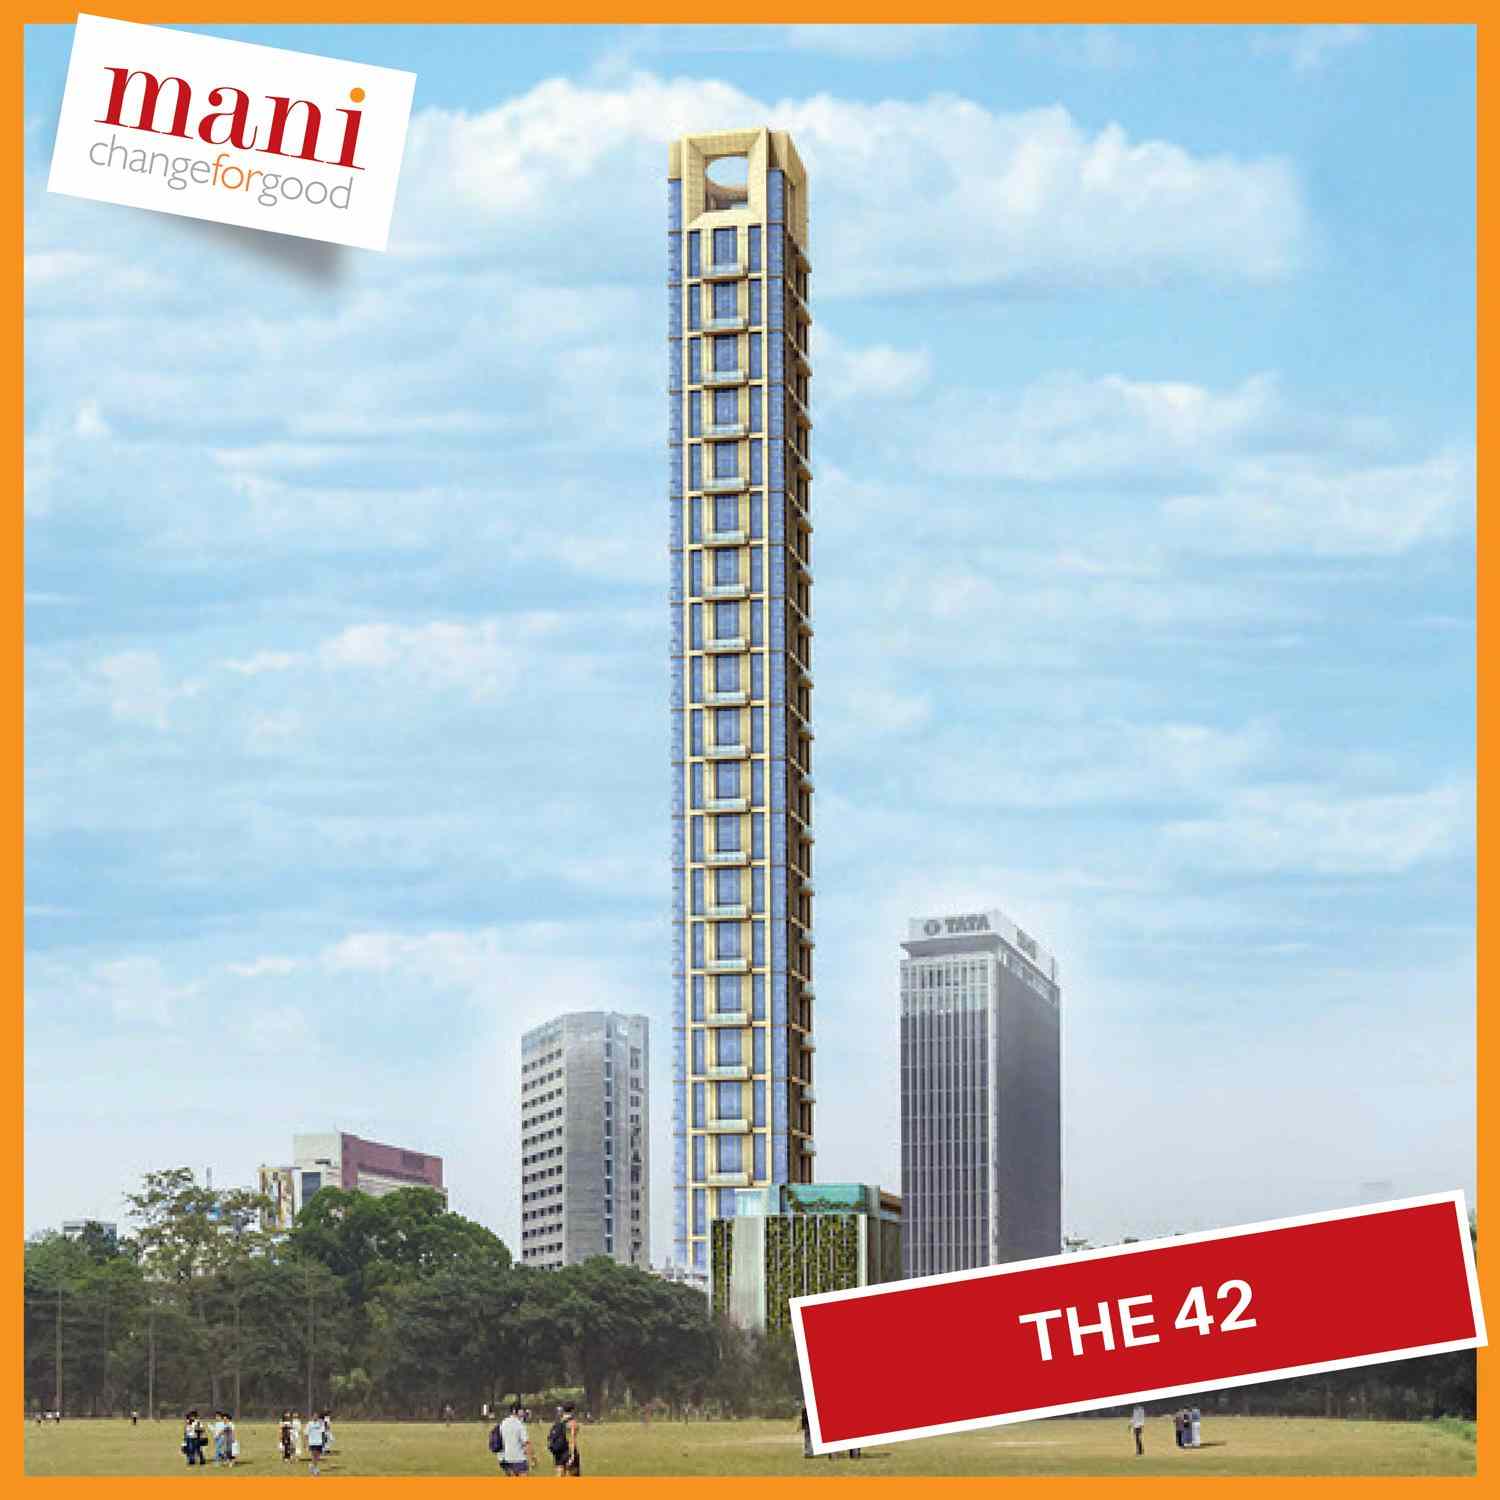 Make your everyday graceful by residing at Mani The 42 in Kolkata Update